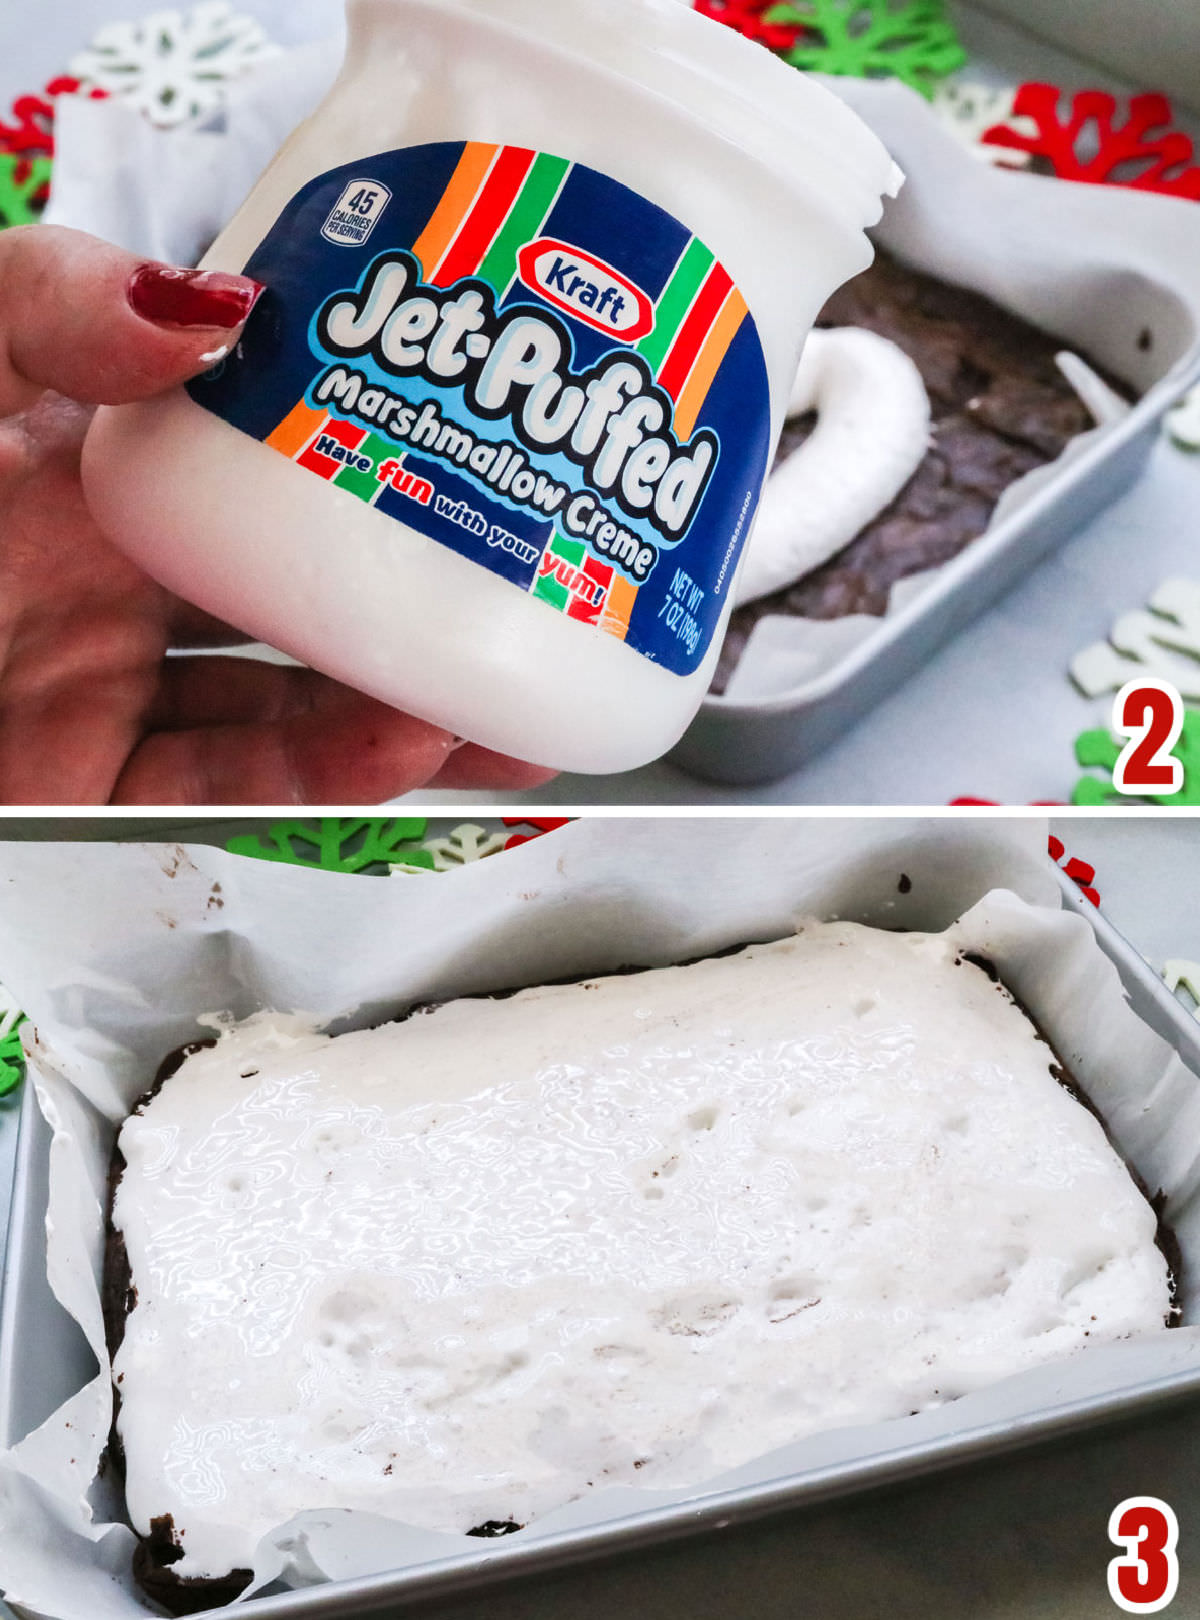 Collage image showing the steps for creating the marshmallow creme layer.